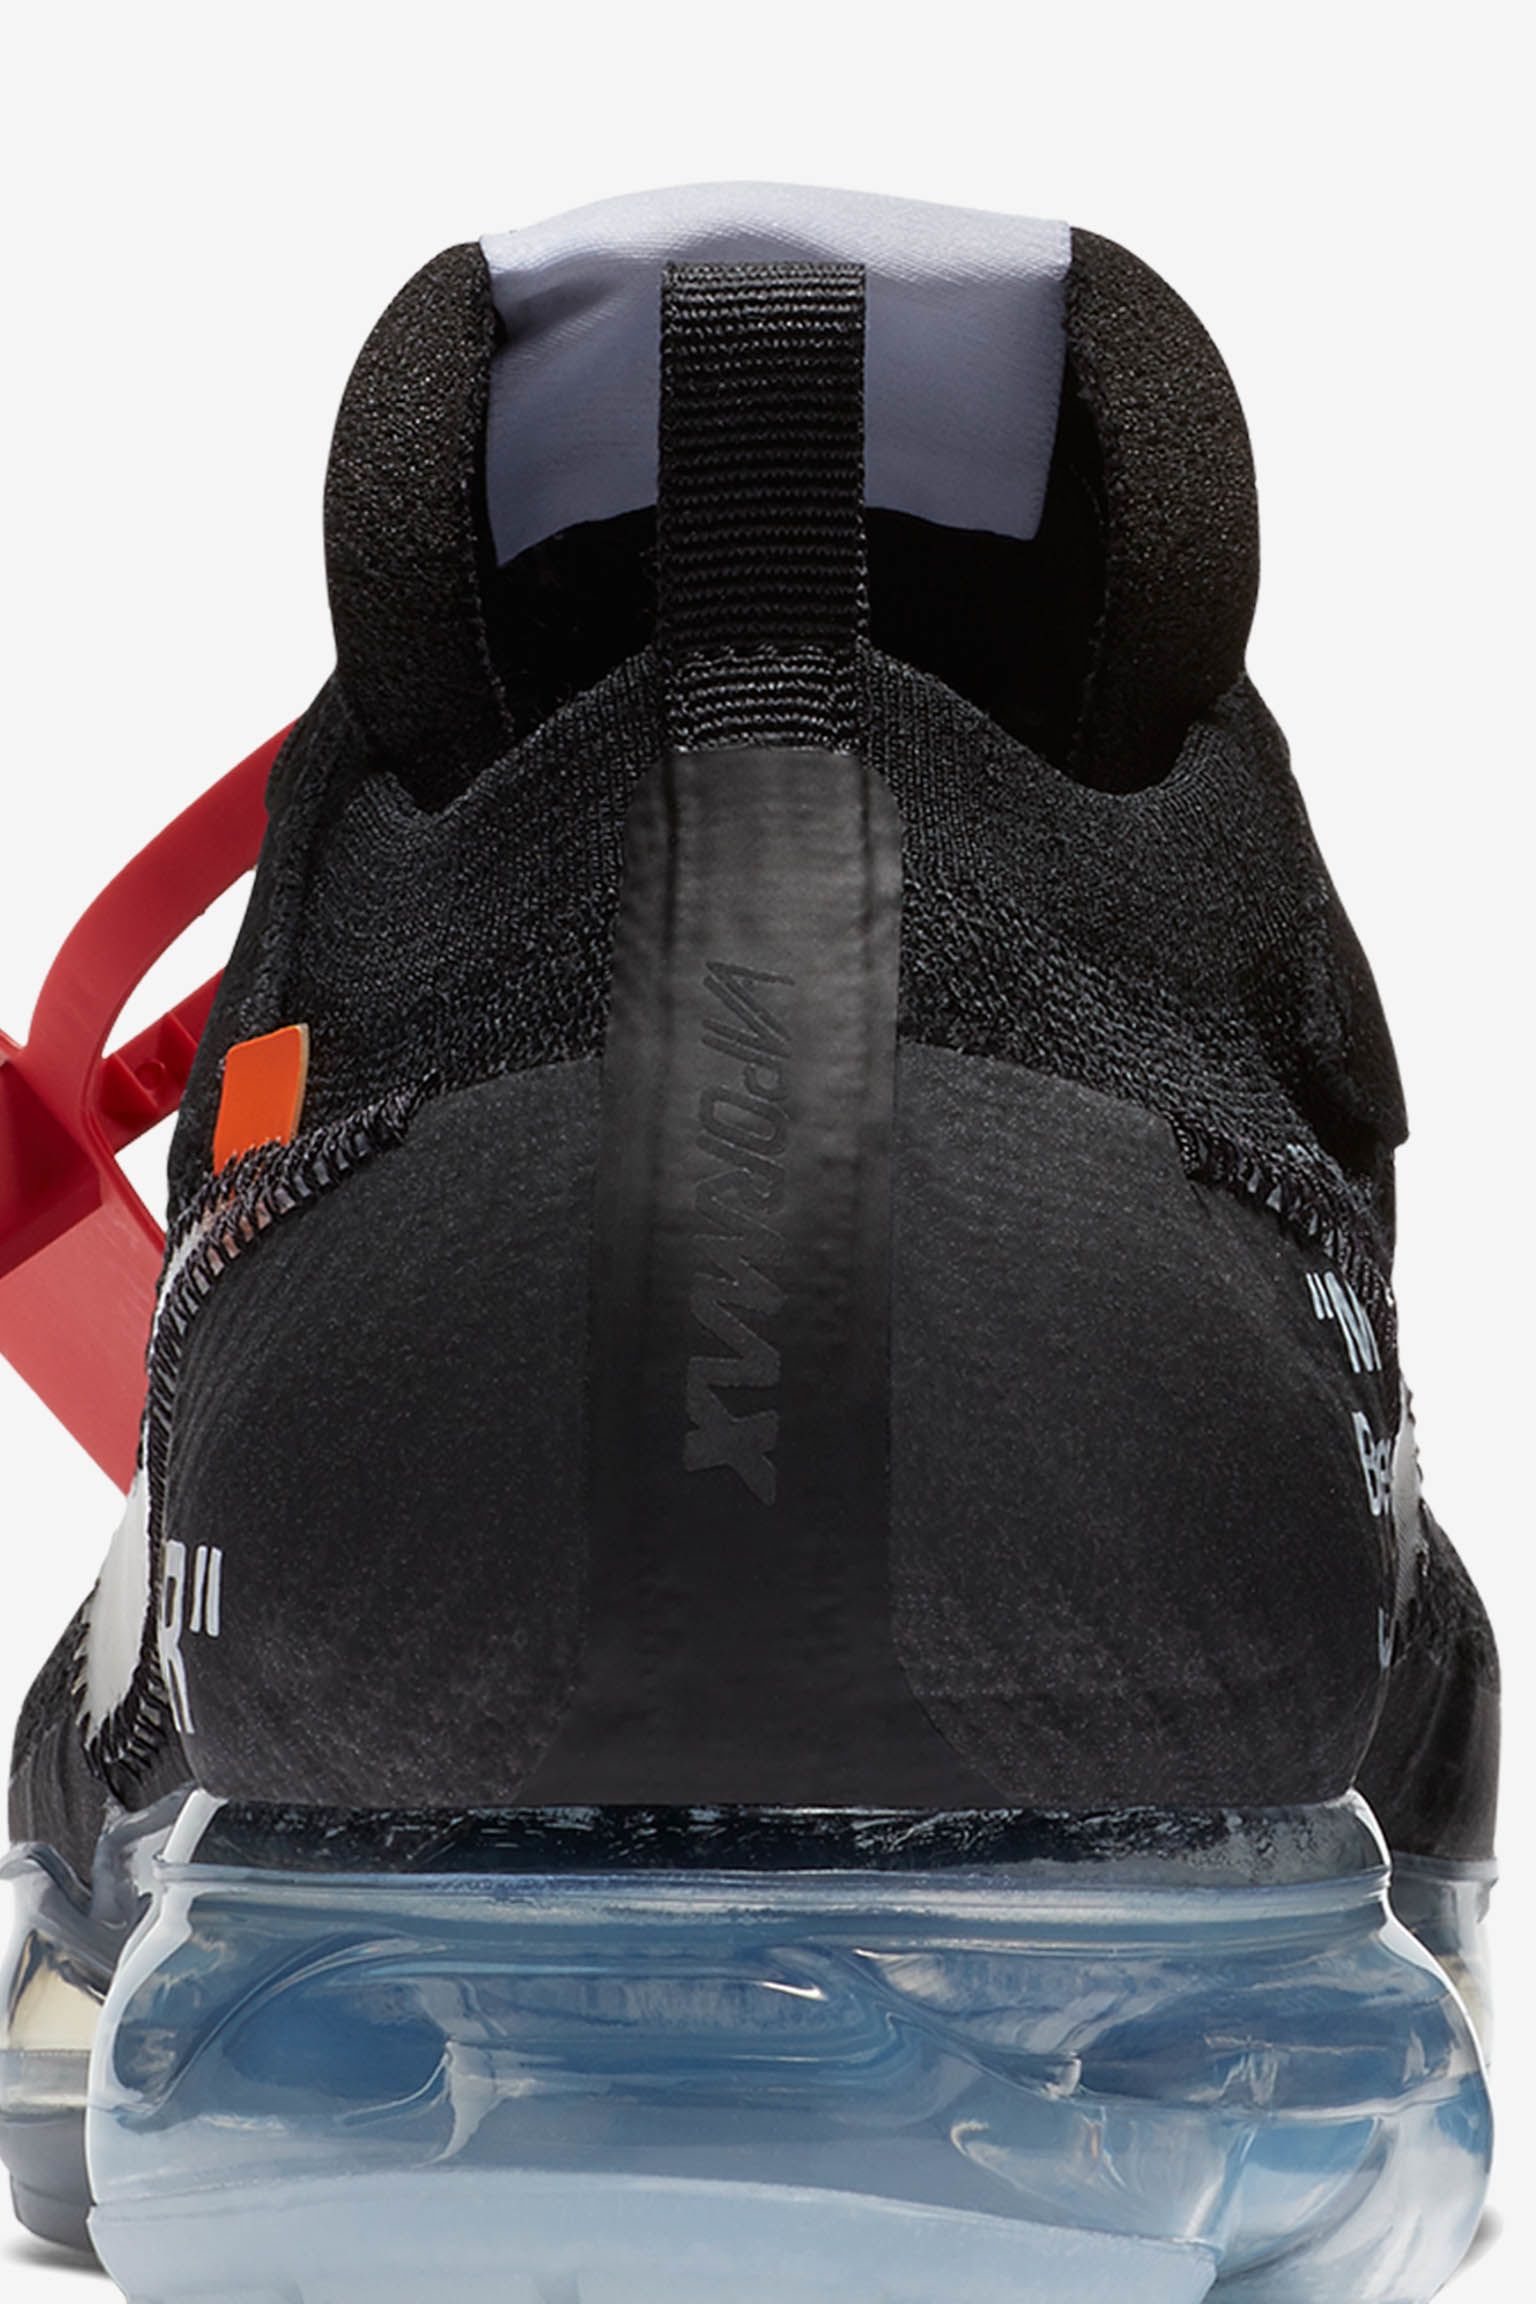 Nike The Ten Air Vapormax Off-White 'Black' Release Date. Nike SNKRS